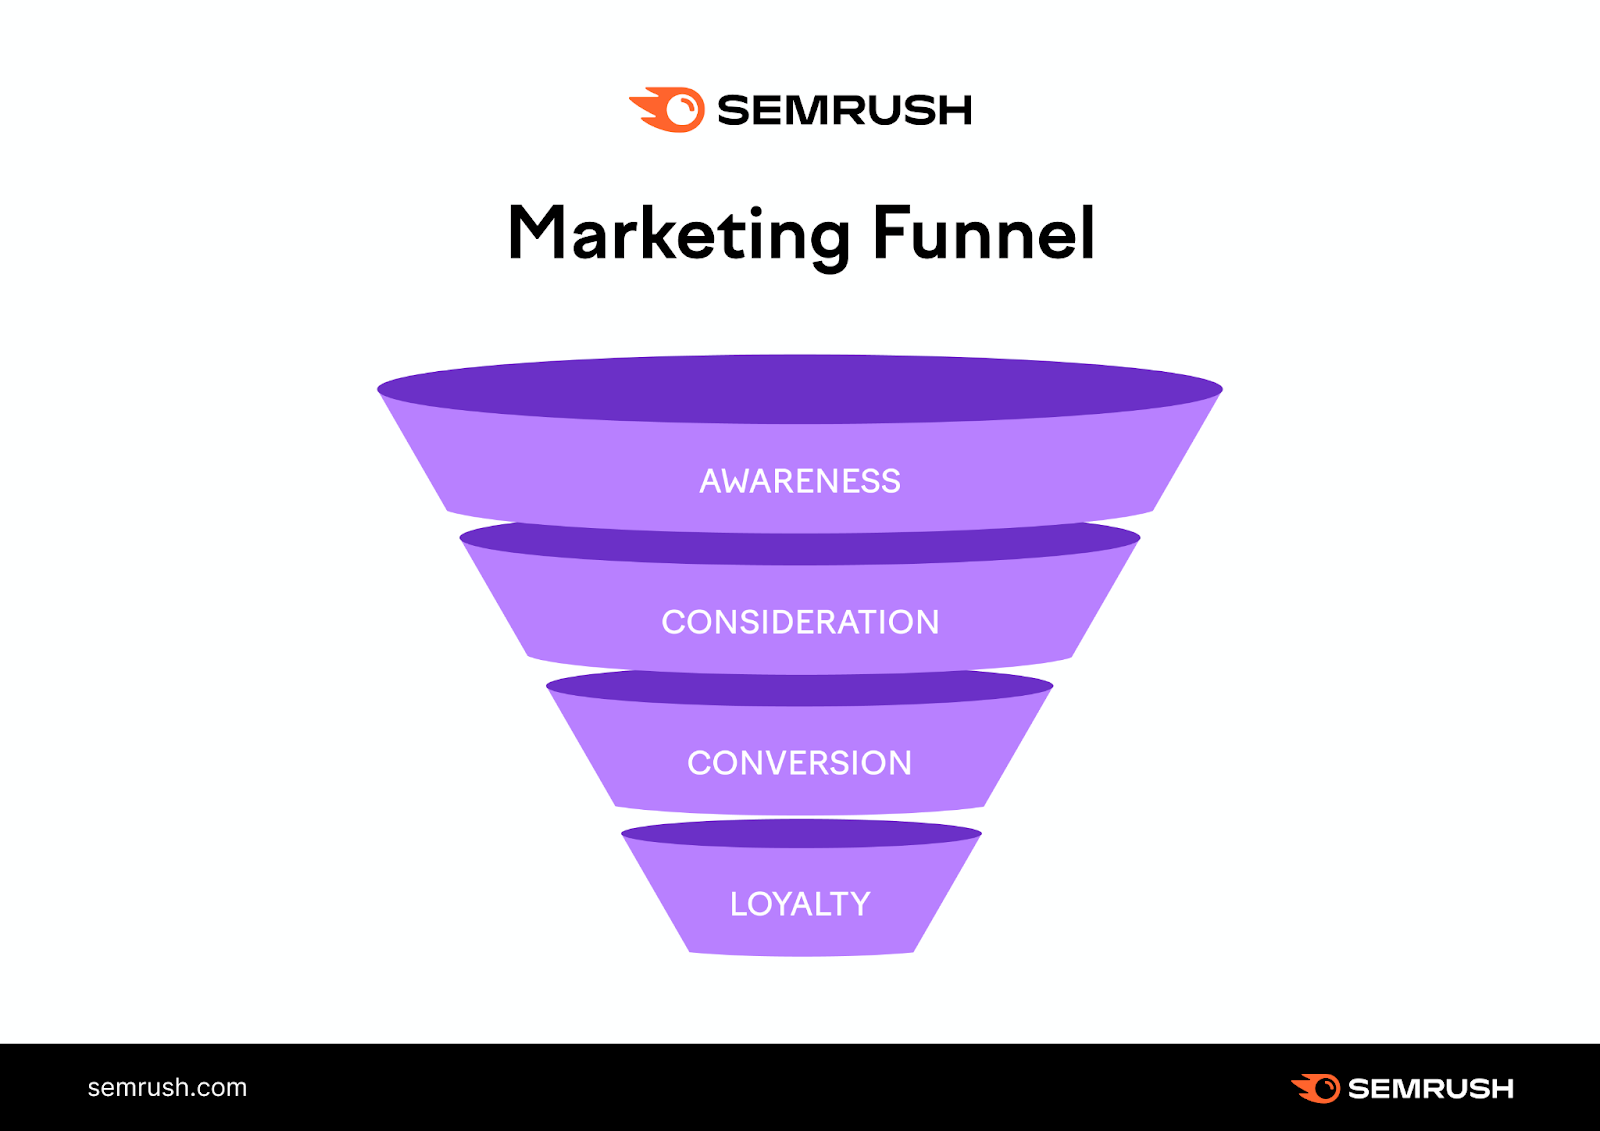 An infographic showing the marketing funnel, with "Awareness," "Consideration," "Conversion" and "Loyalty" stages